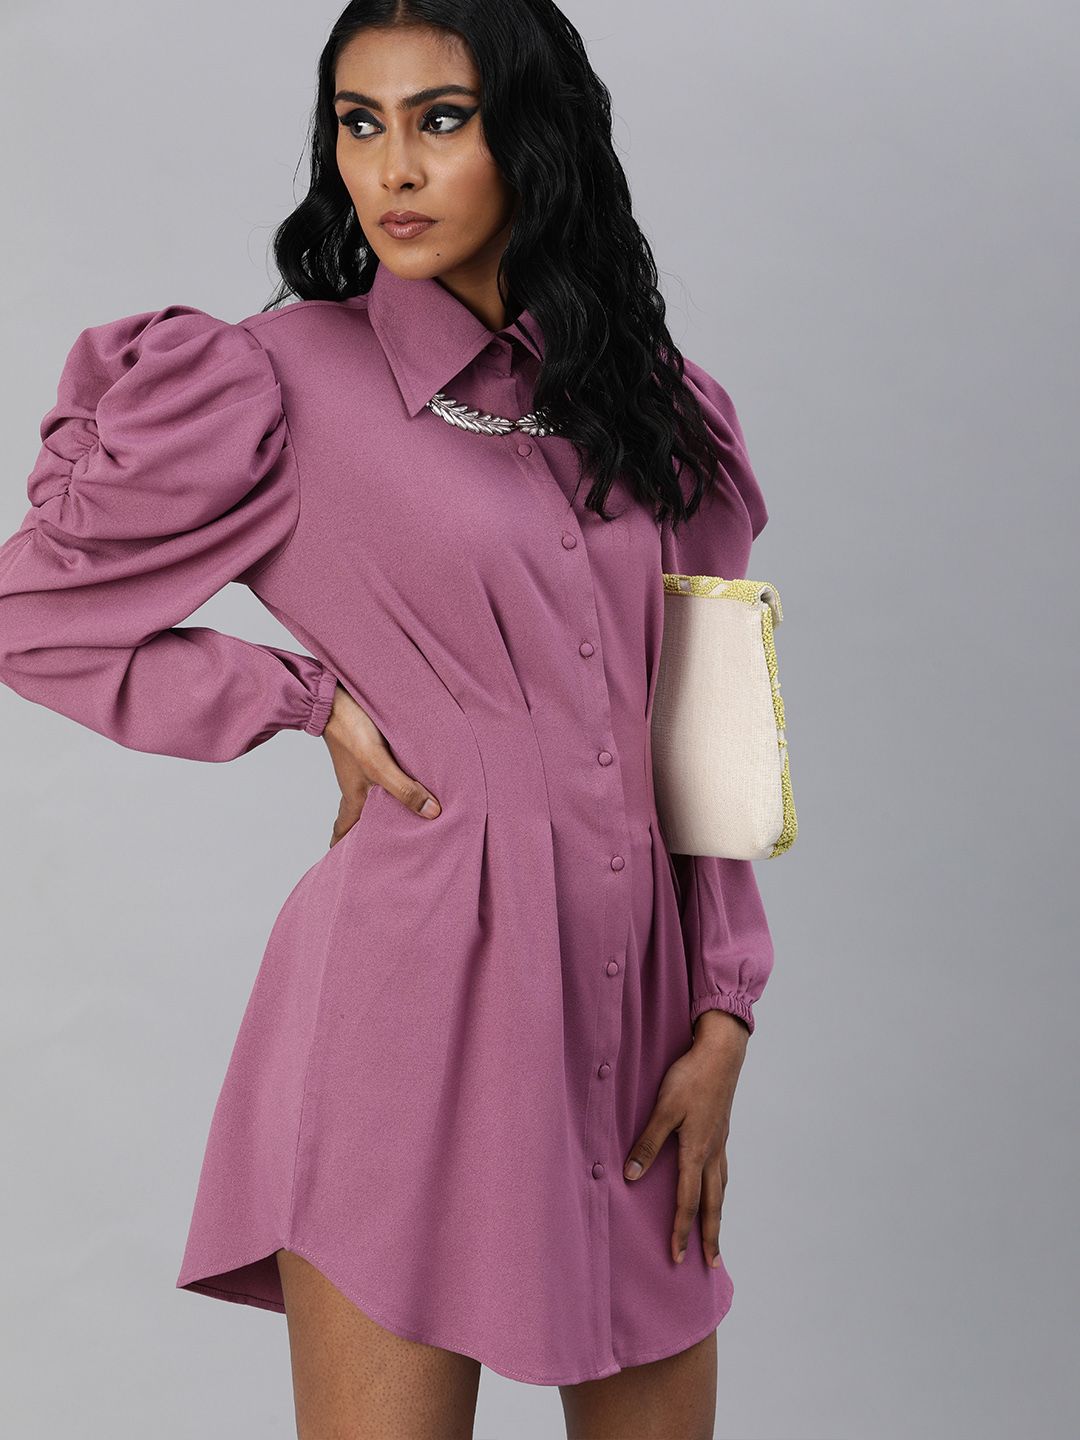 KASSUALLY Women Purple Solid Pleated Power Shoulder Shirt Dress Price in India